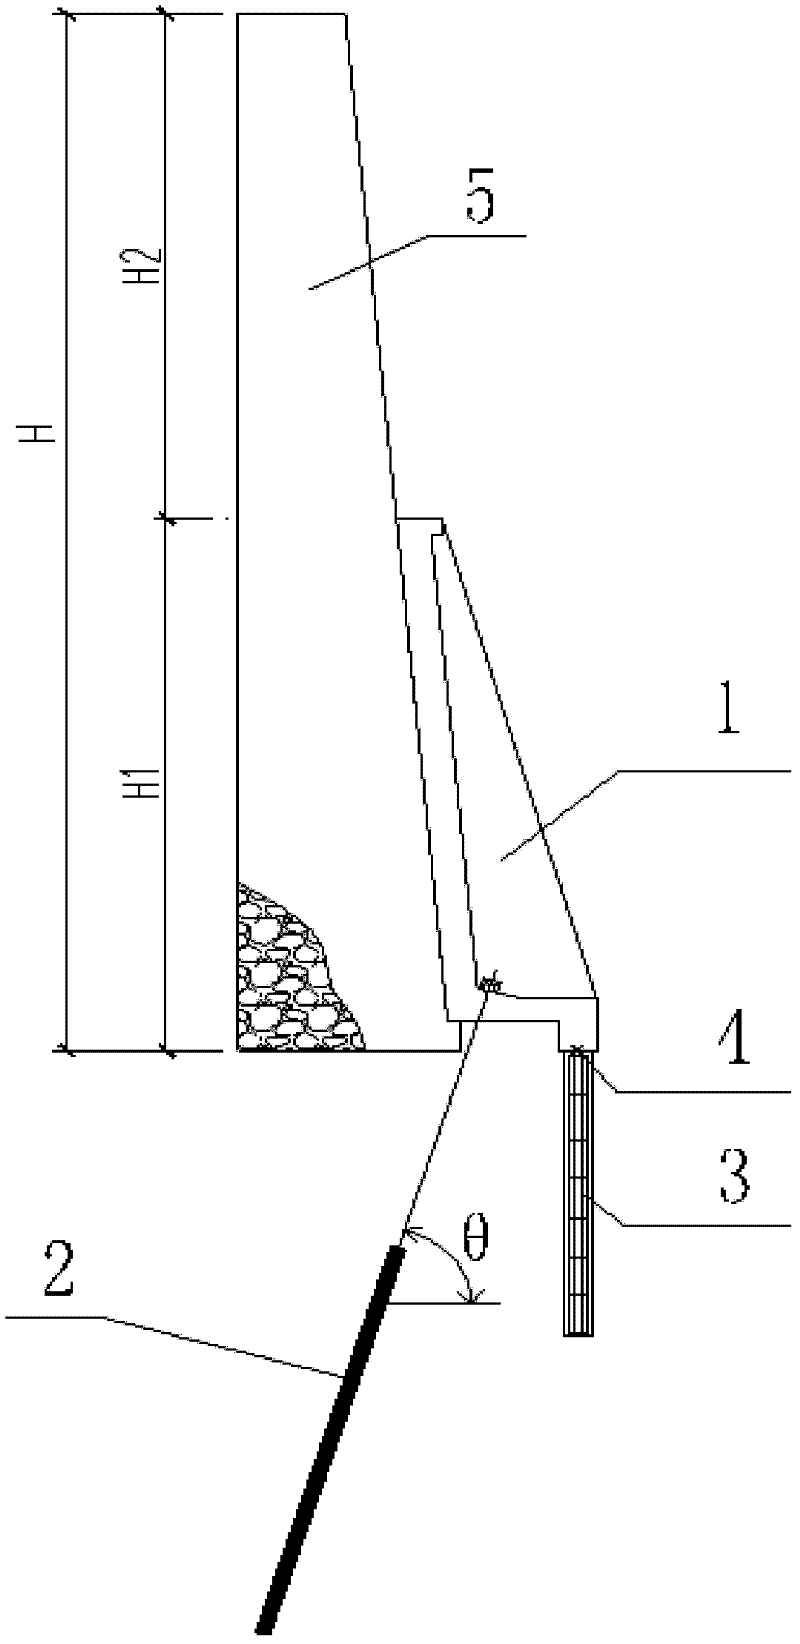 Anchoring and retaining structure for reducing support height of existing overhigh retaining wall